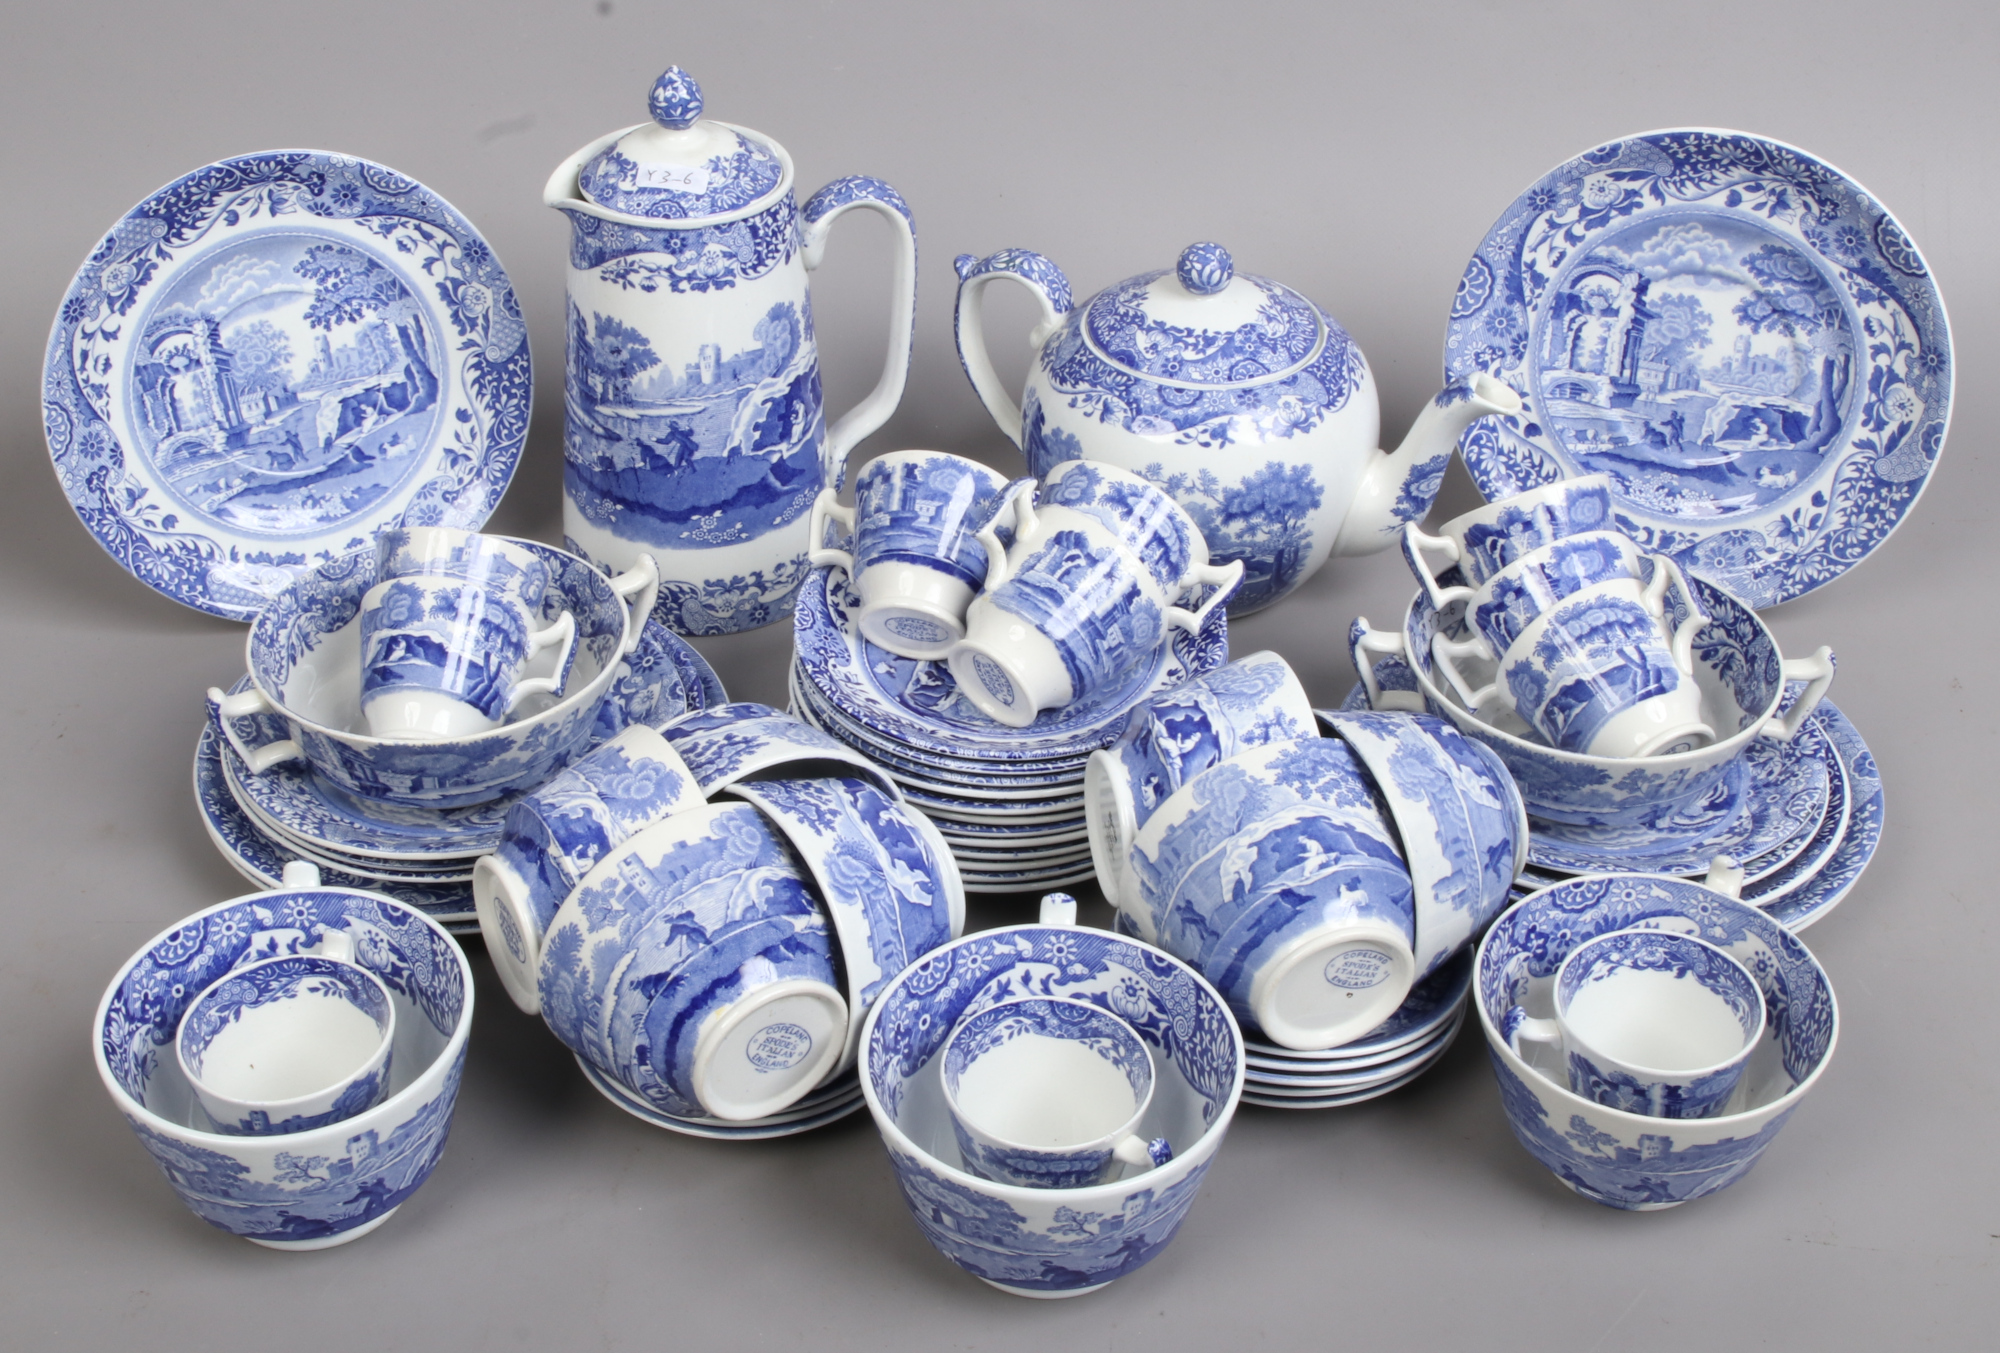 A collection of Copeland Spode Italian design blue and white teawares, approximately 56 pieces.